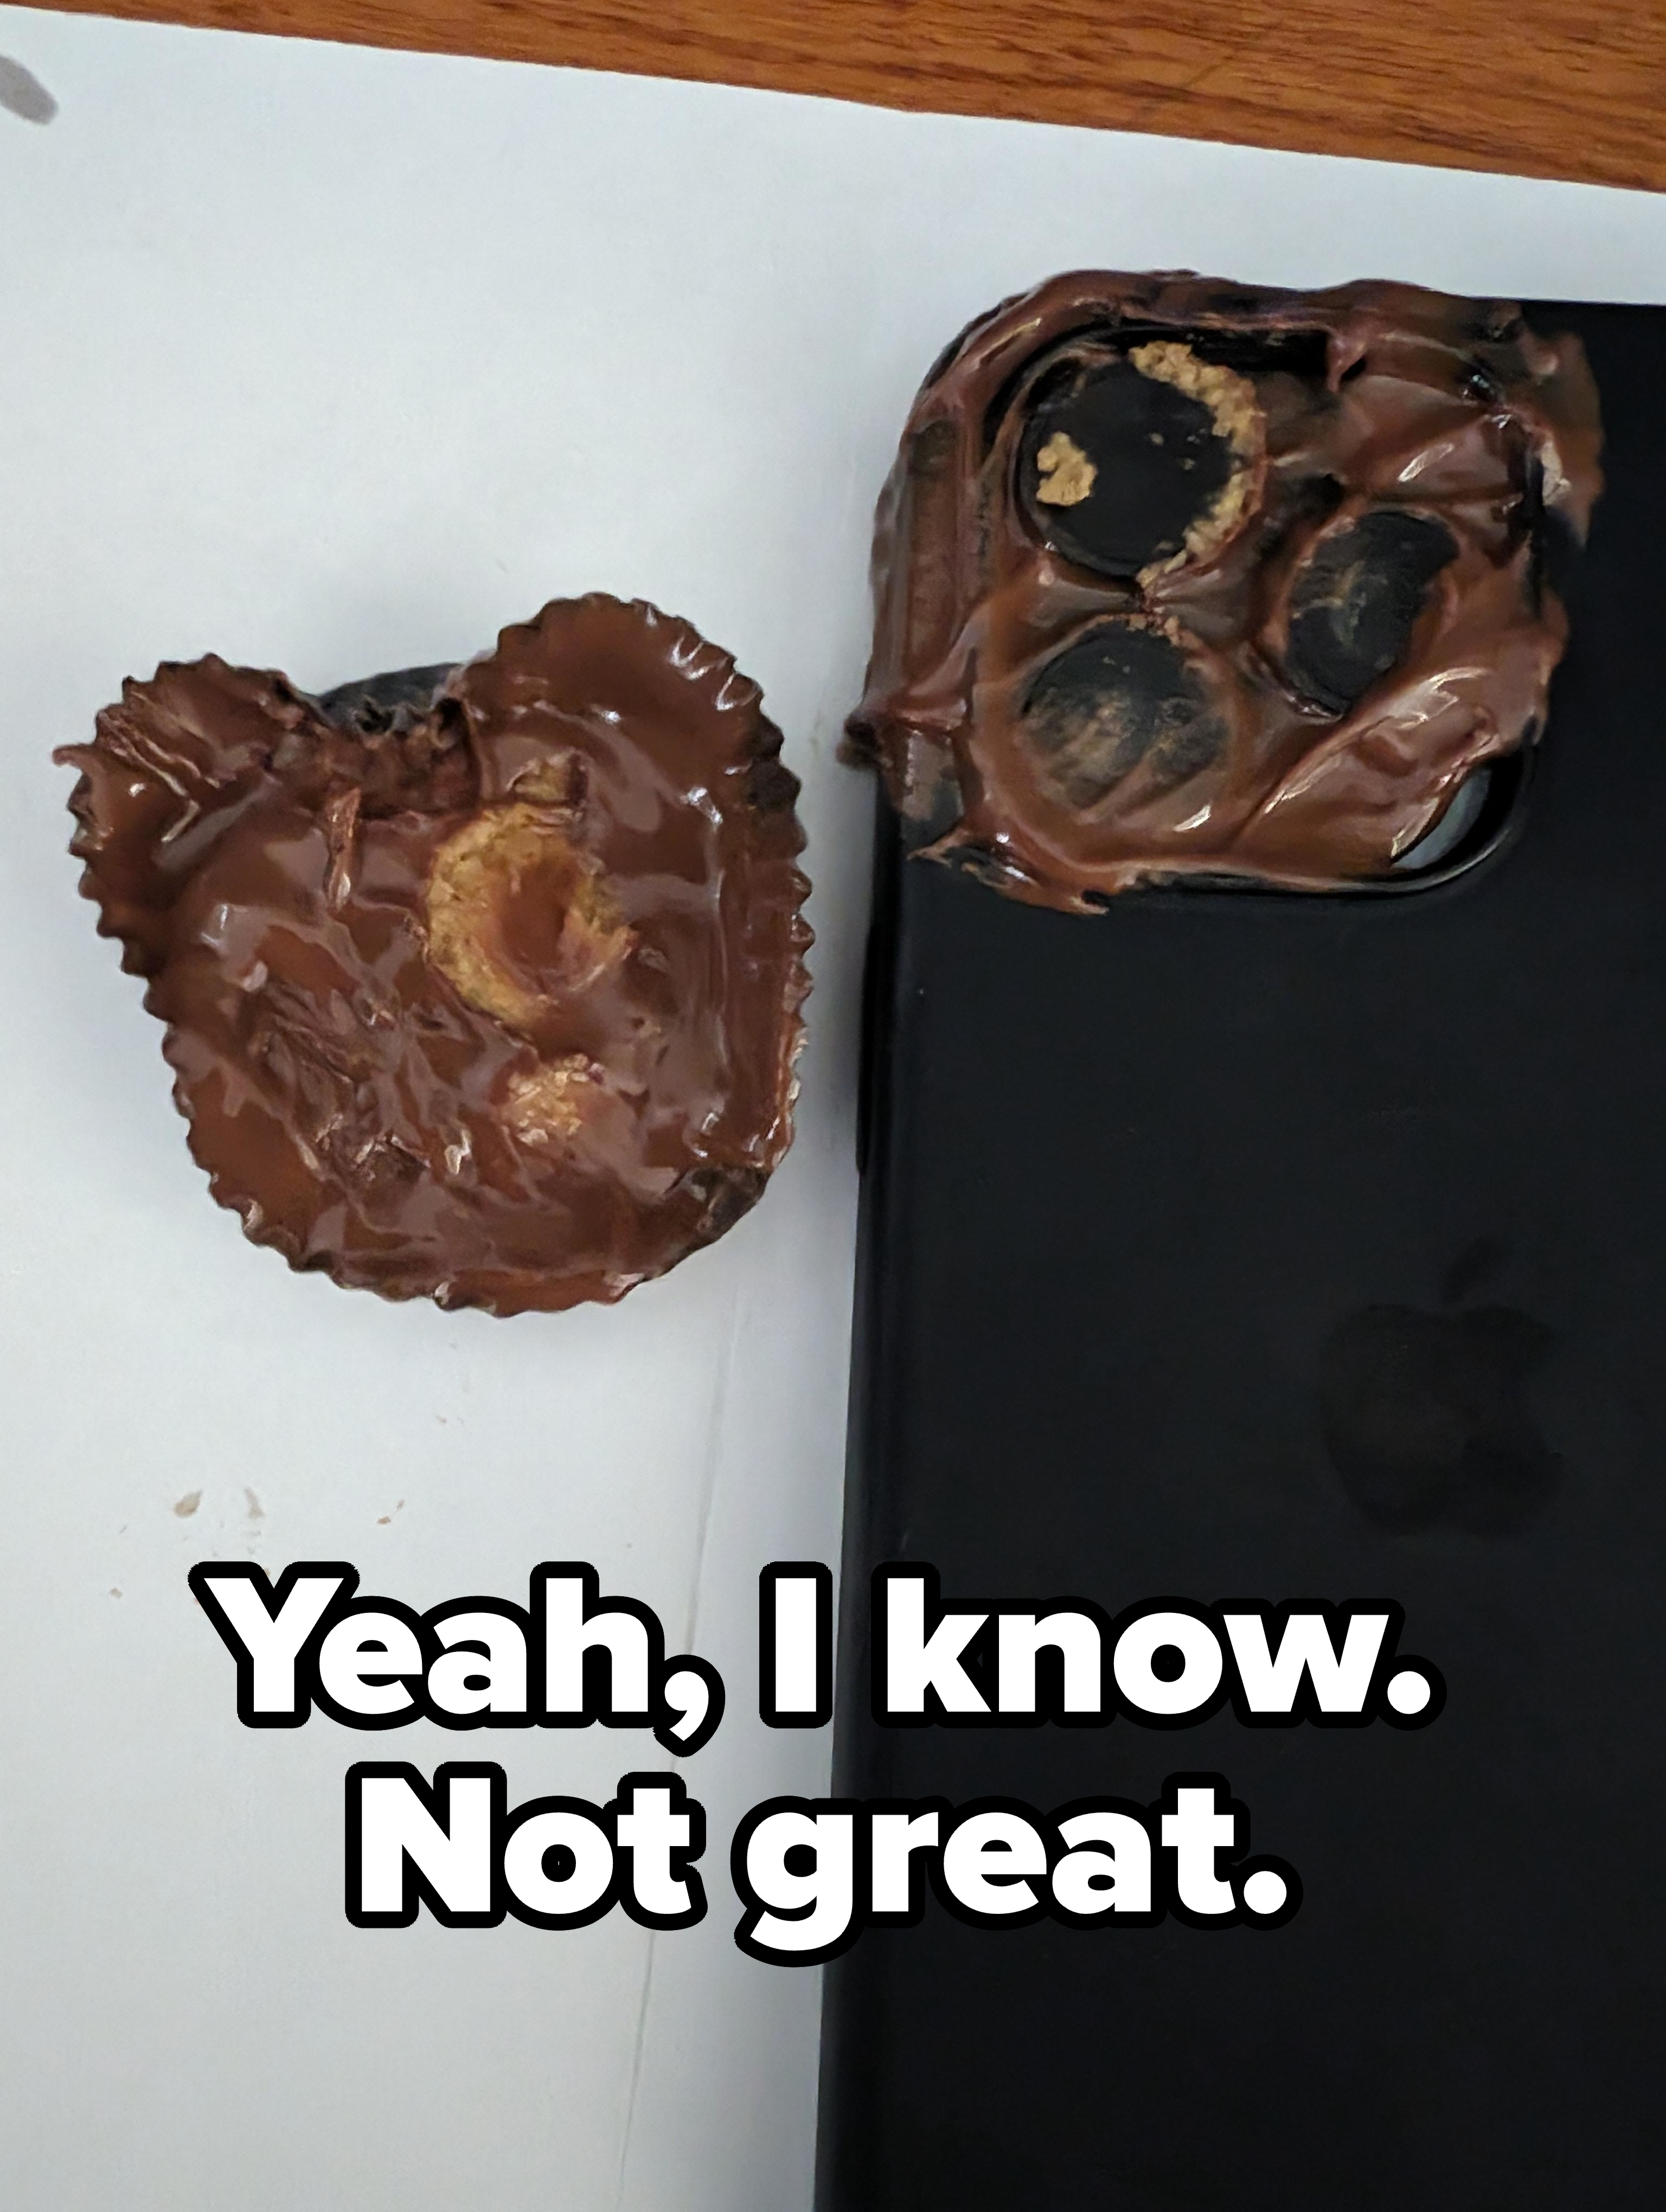 Chocolate in the shape of a bitten heart next to a smartphone